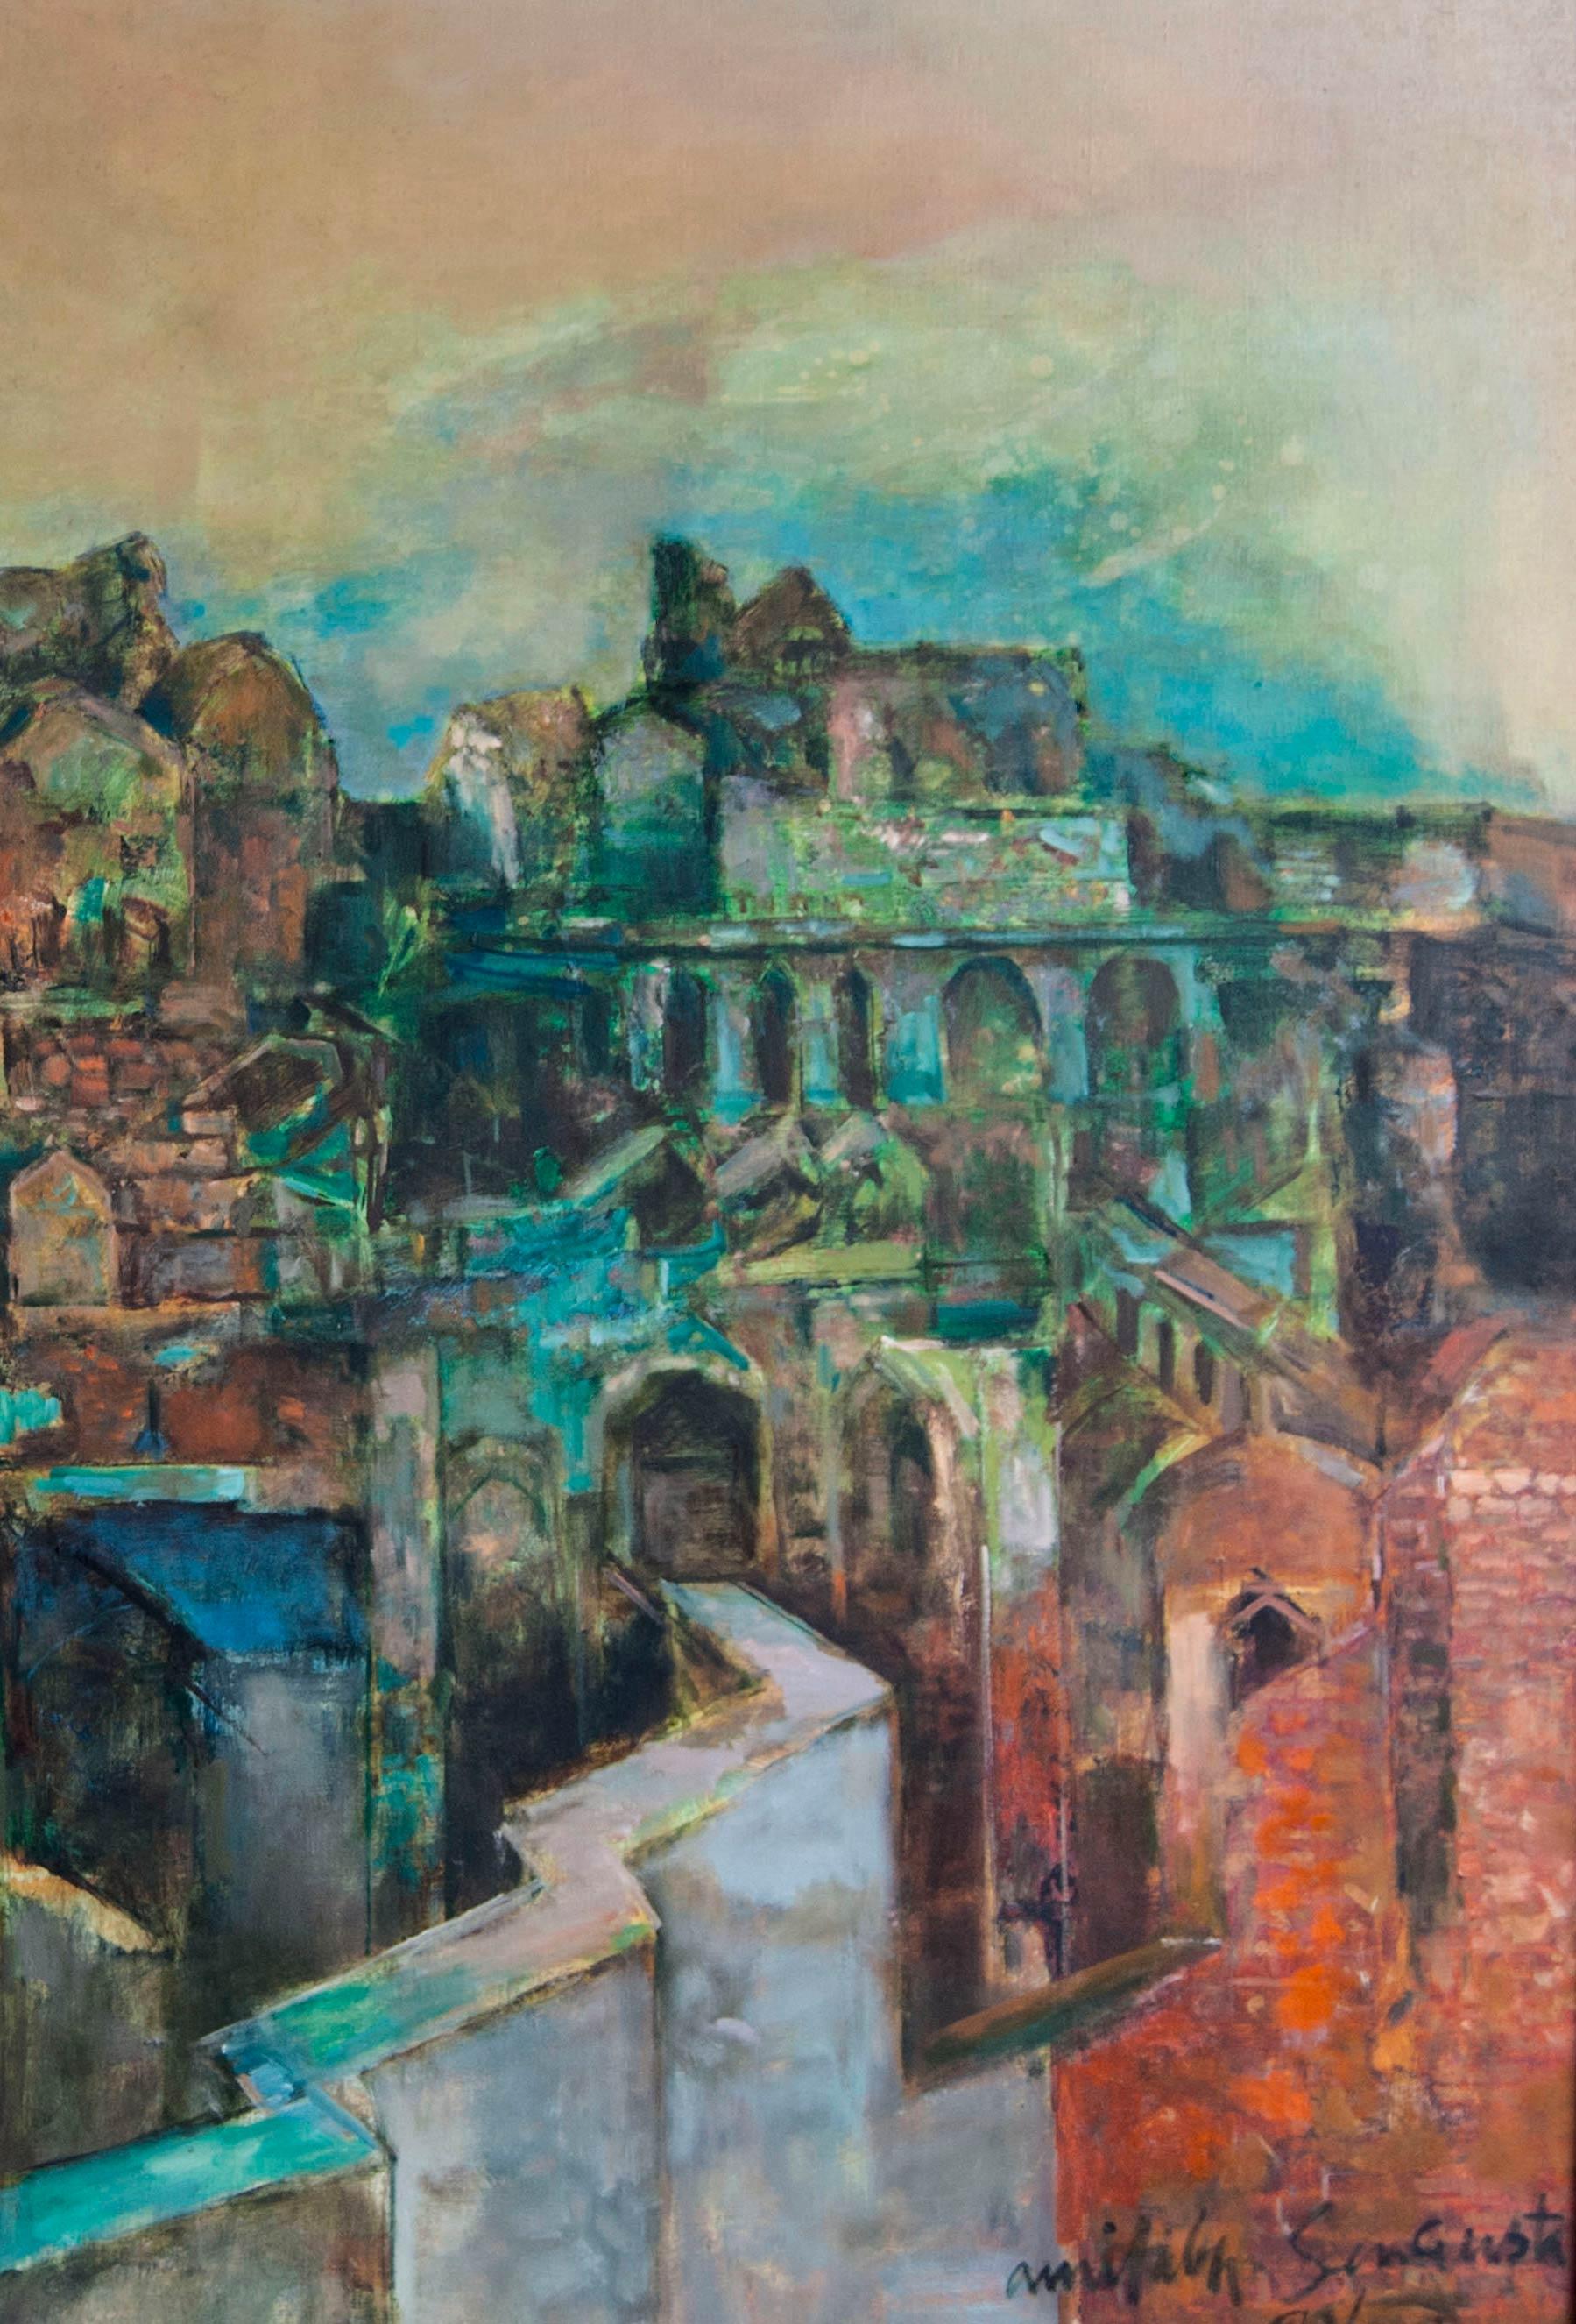 Unknown Fort, Mythscape, Series of Structures, Oil painting by Amitabh 